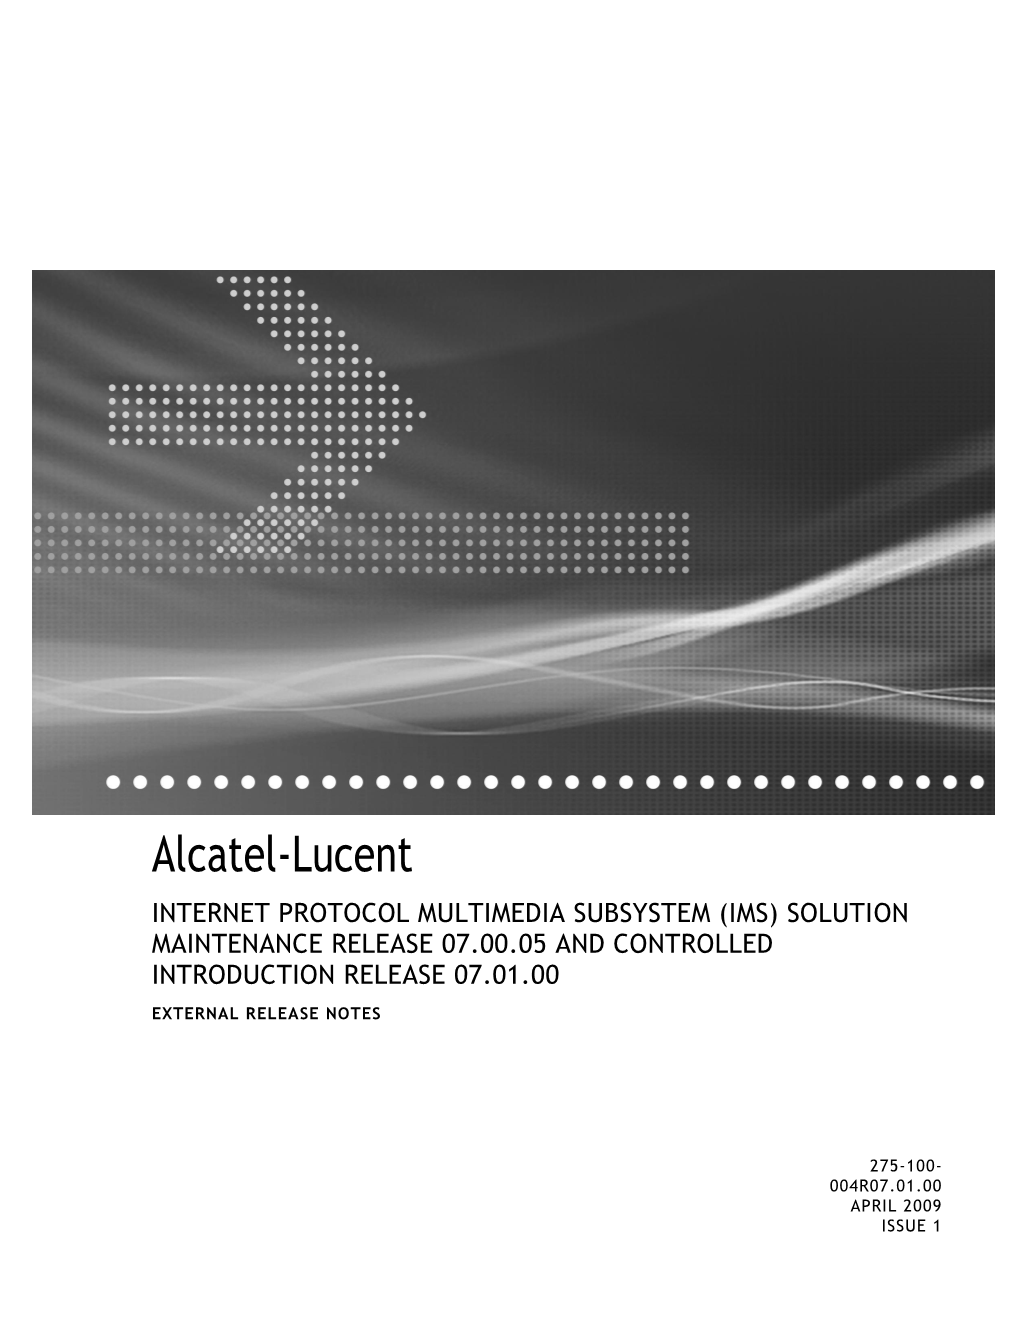 Alcatel-Lucent INTERNET PROTOCOL MULTIMEDIA SUBSYSTEM (IMS) SOLUTION MAINTENANCE RELEASE 07.00.05 and CONTROLLED INTRODUCTION RELEASE 07.01.00